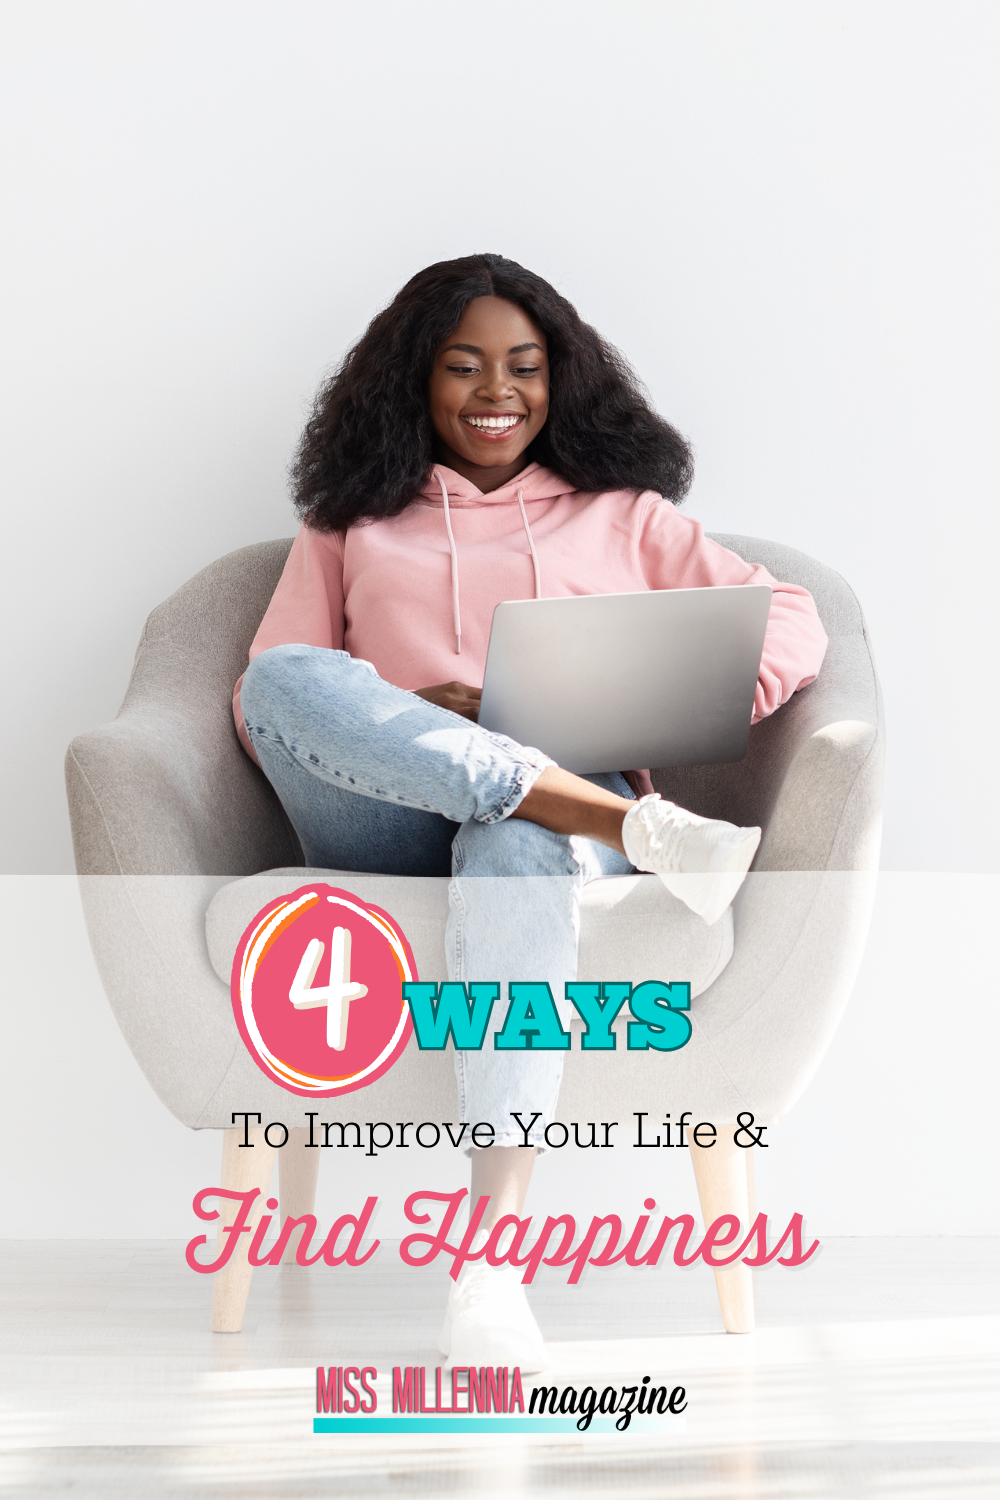 4 Ways To Improve Your Life & Find Happiness